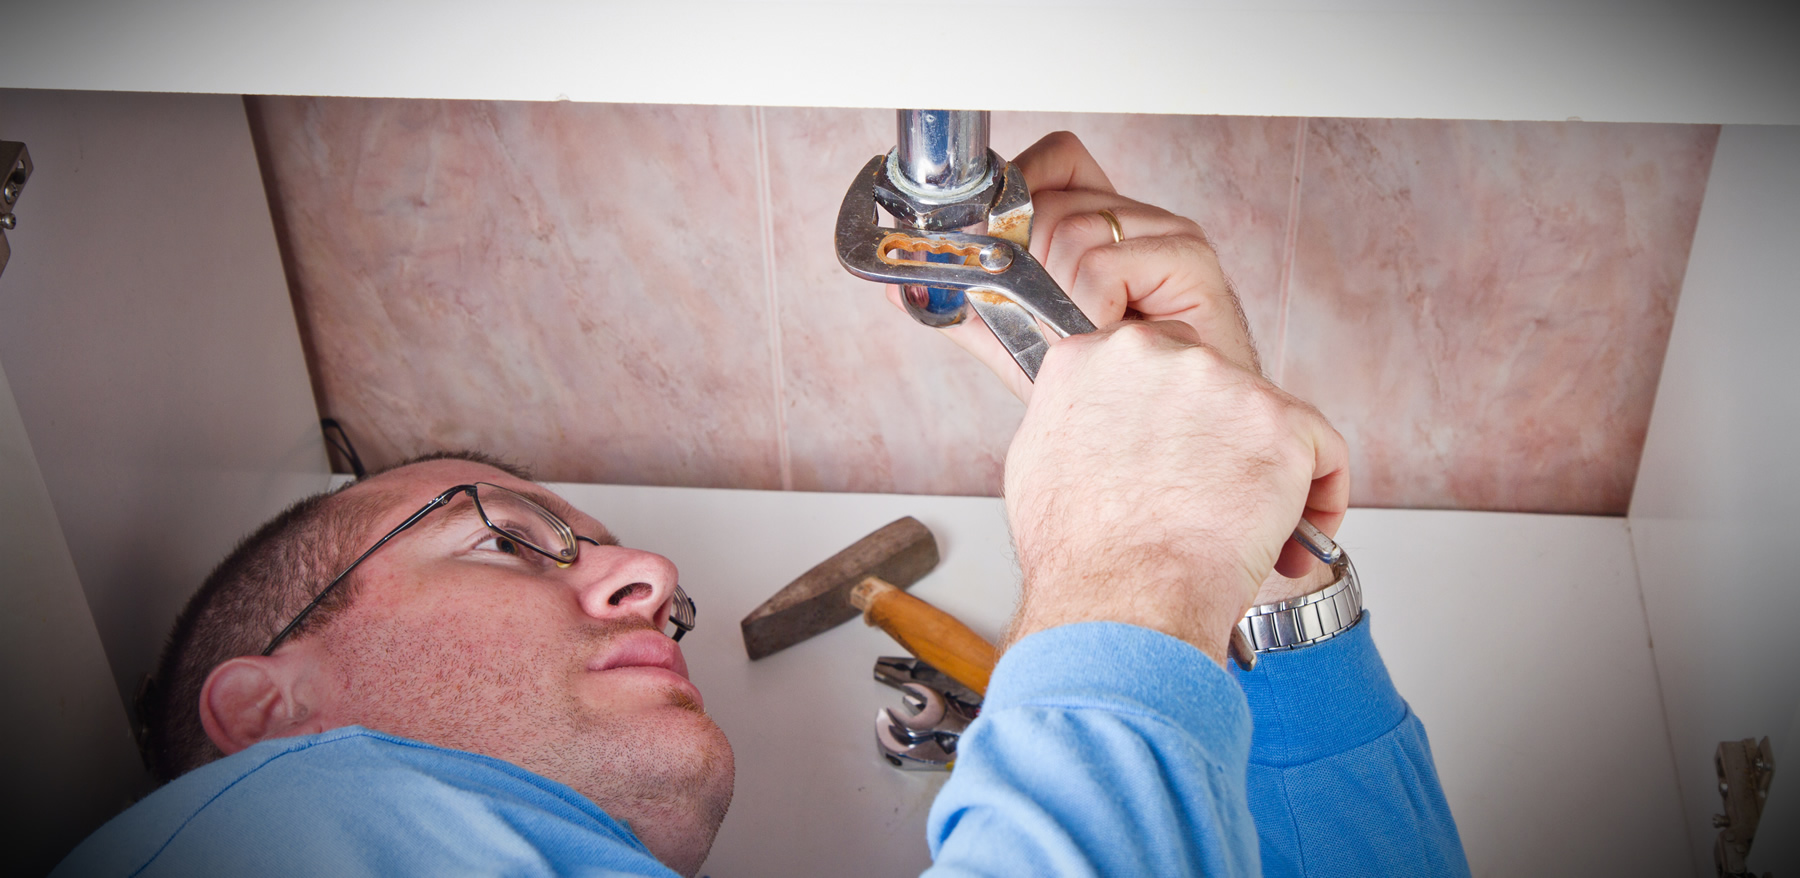 Finding a Trustworthy Plumber in Montebello, CA: A Handyman’s Guide